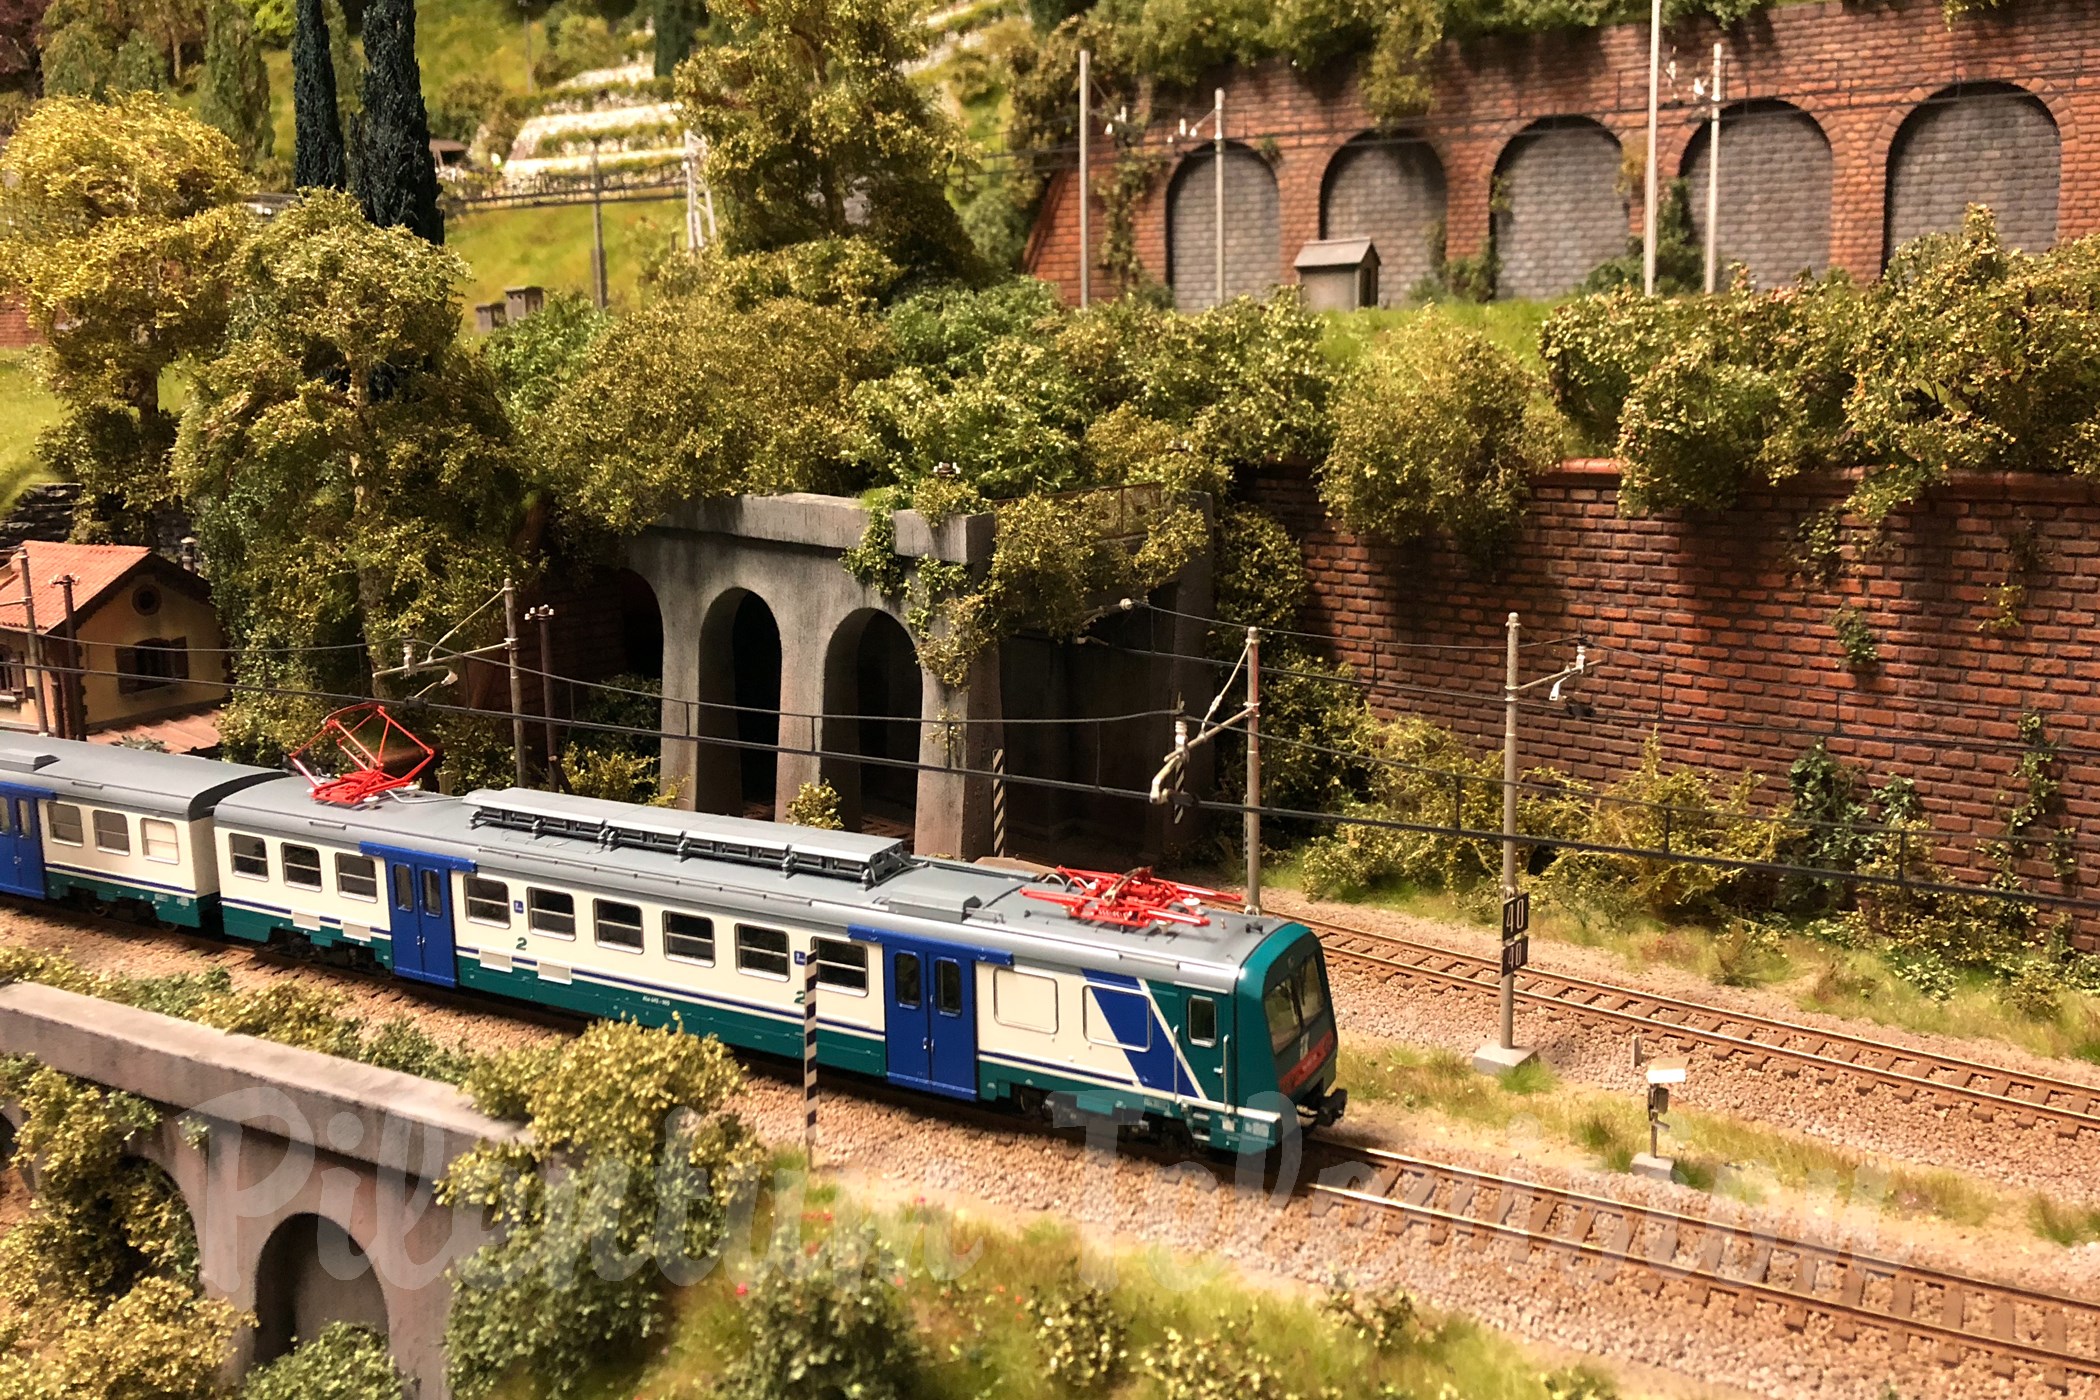 Treni in Transito: Rail Transport Modeling and Railway Modelling in Italia - The Superb Model Railroad Layout by Carlo Viganò